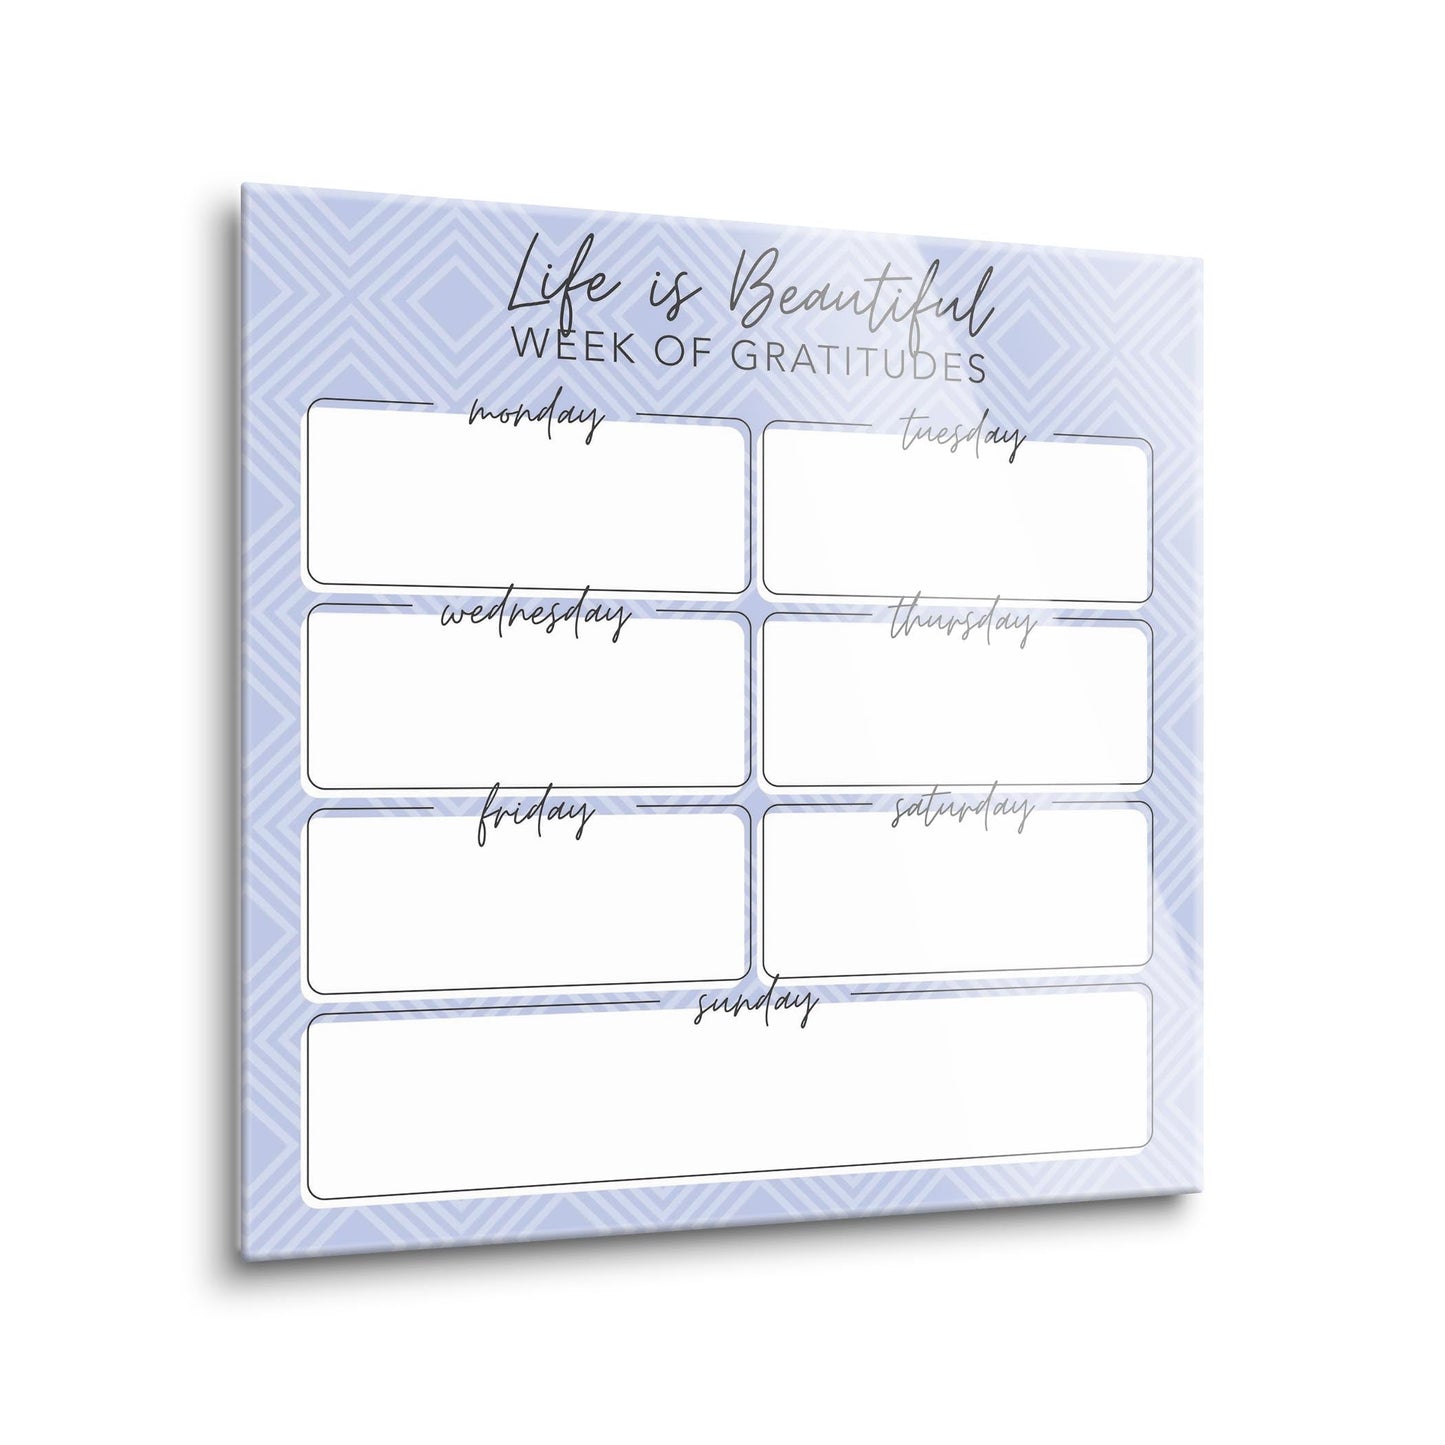 Mother's Day Tracker Life Is Beautiful Gratitudes | 12x12